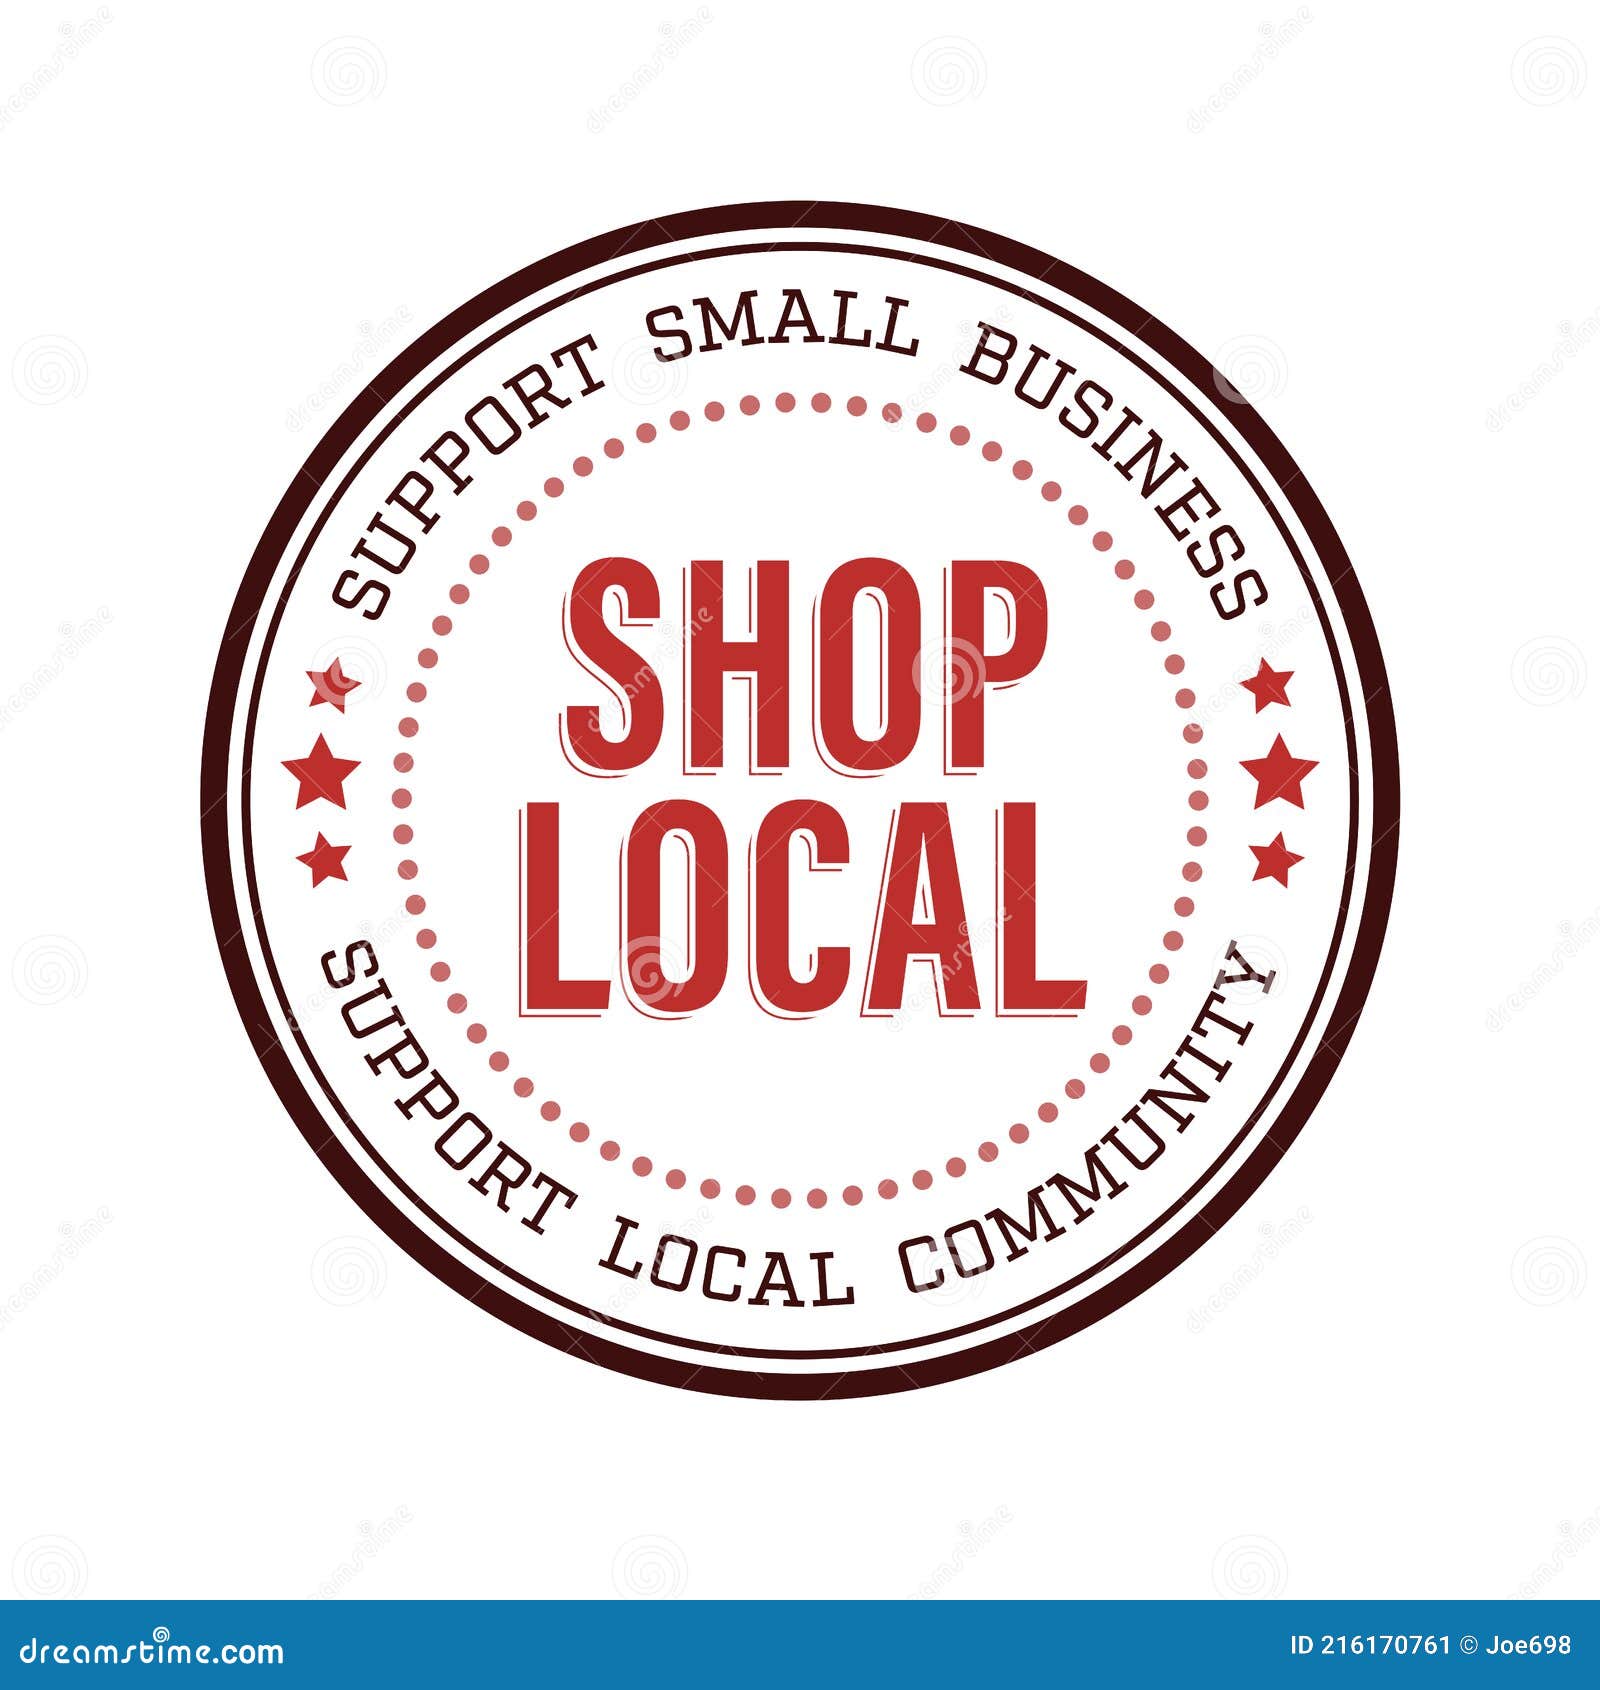 shop local small business  logo icon - buy local shop small - support local business graphics